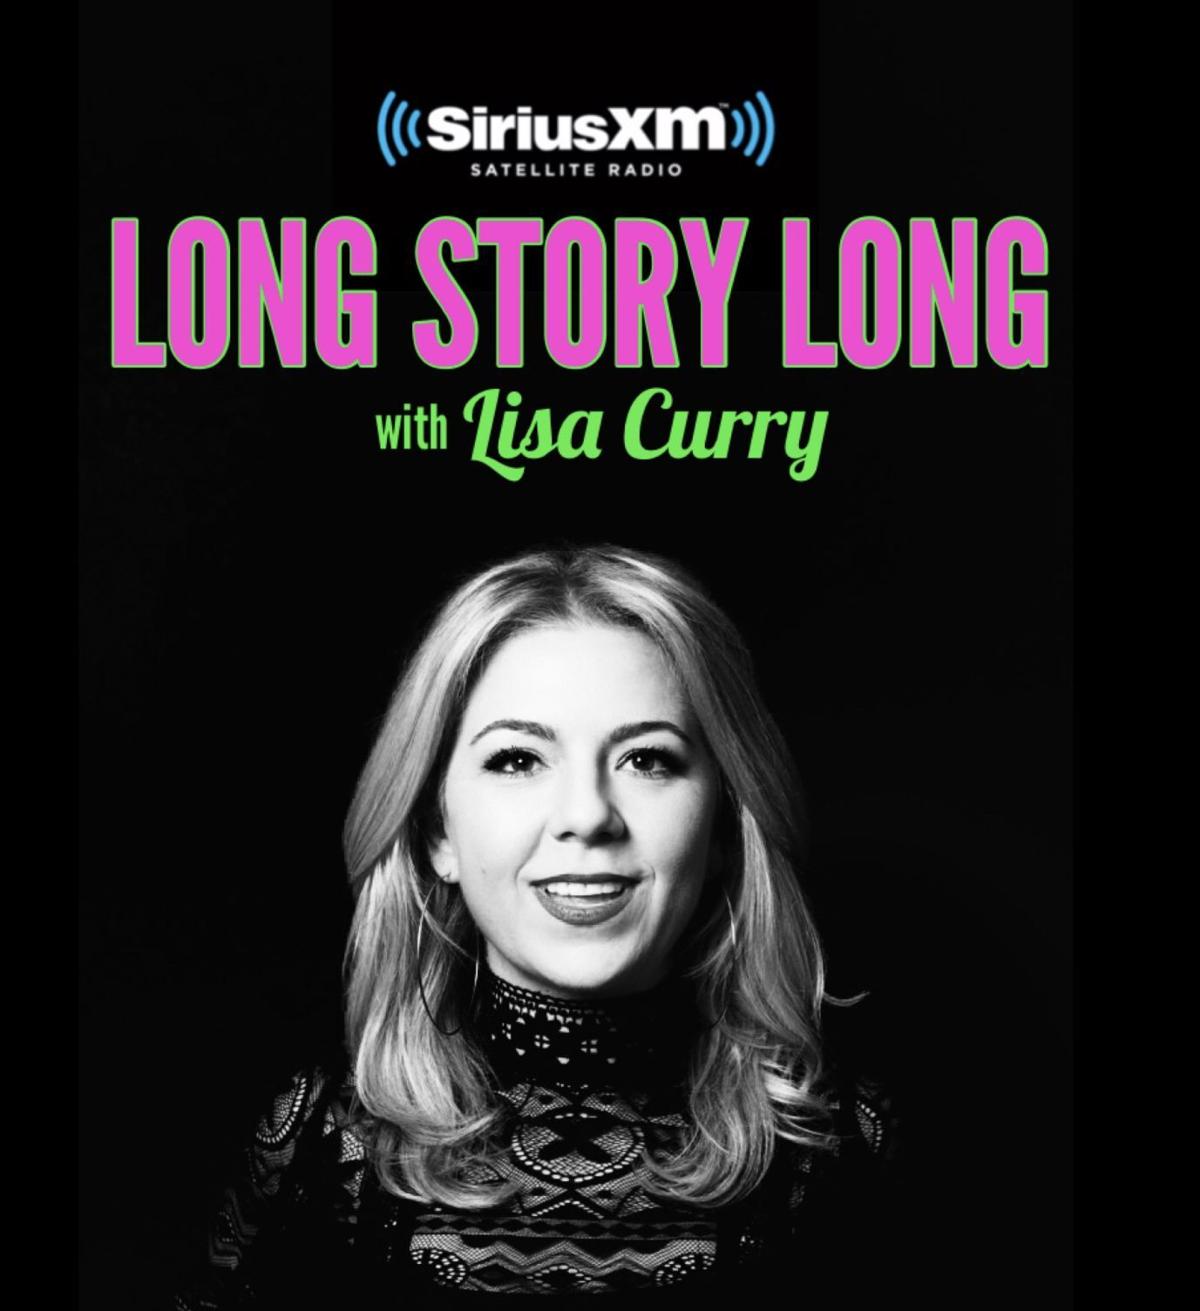 Long Story Long with Lisa Curry